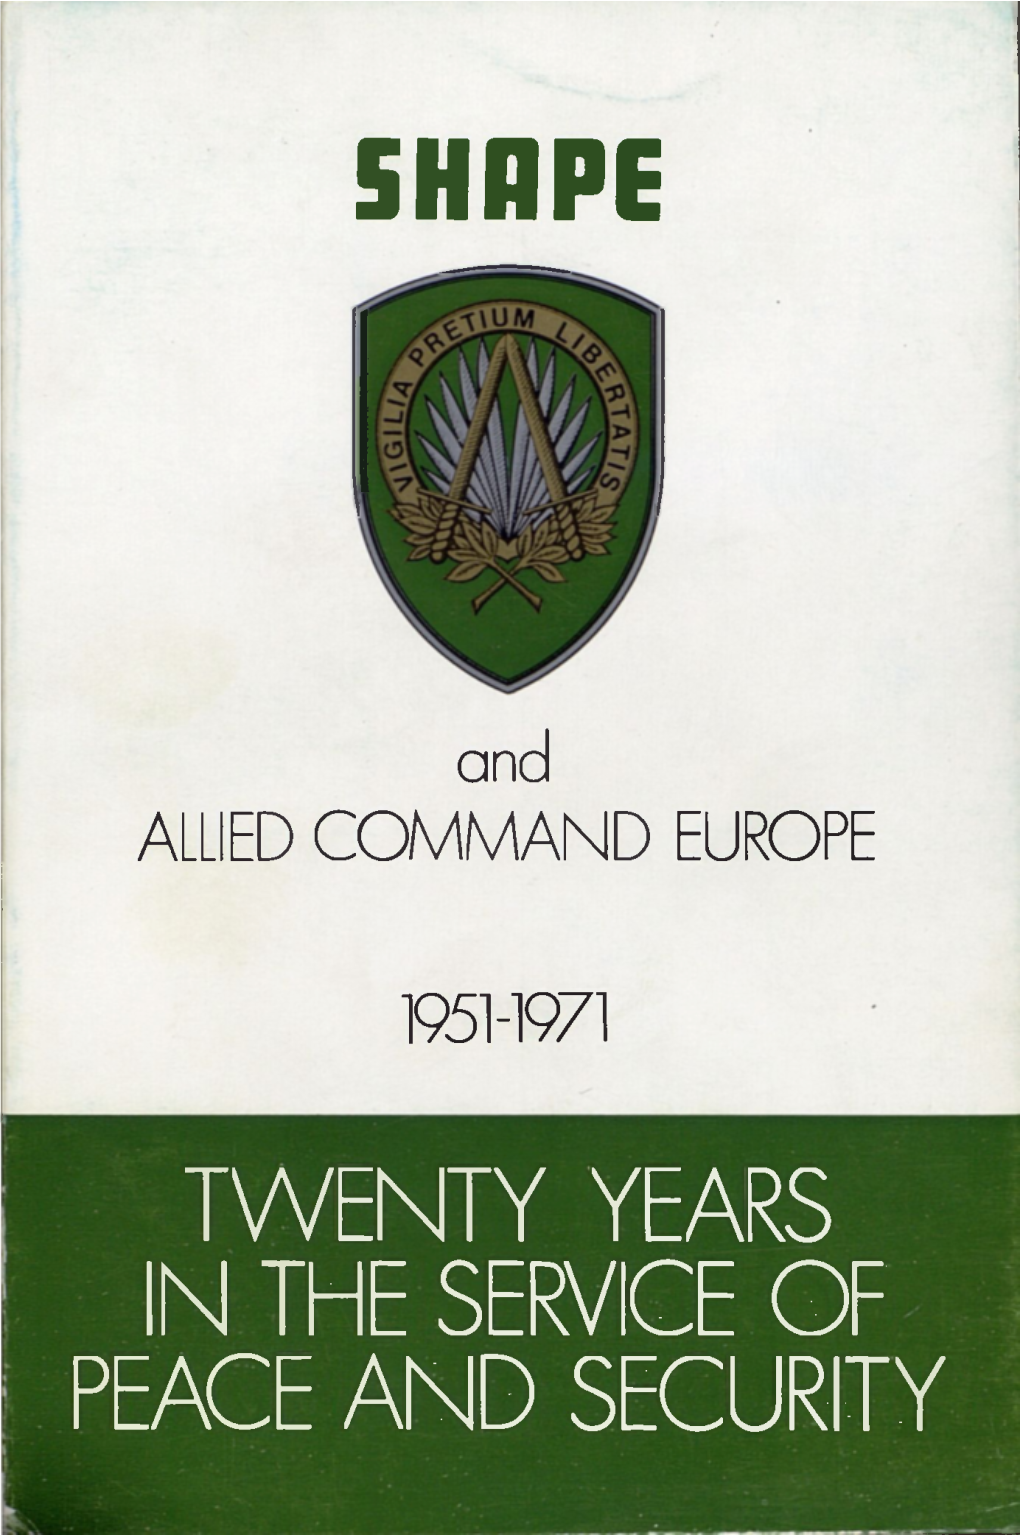 SHAPE and Allied Command Europe 1951-1971